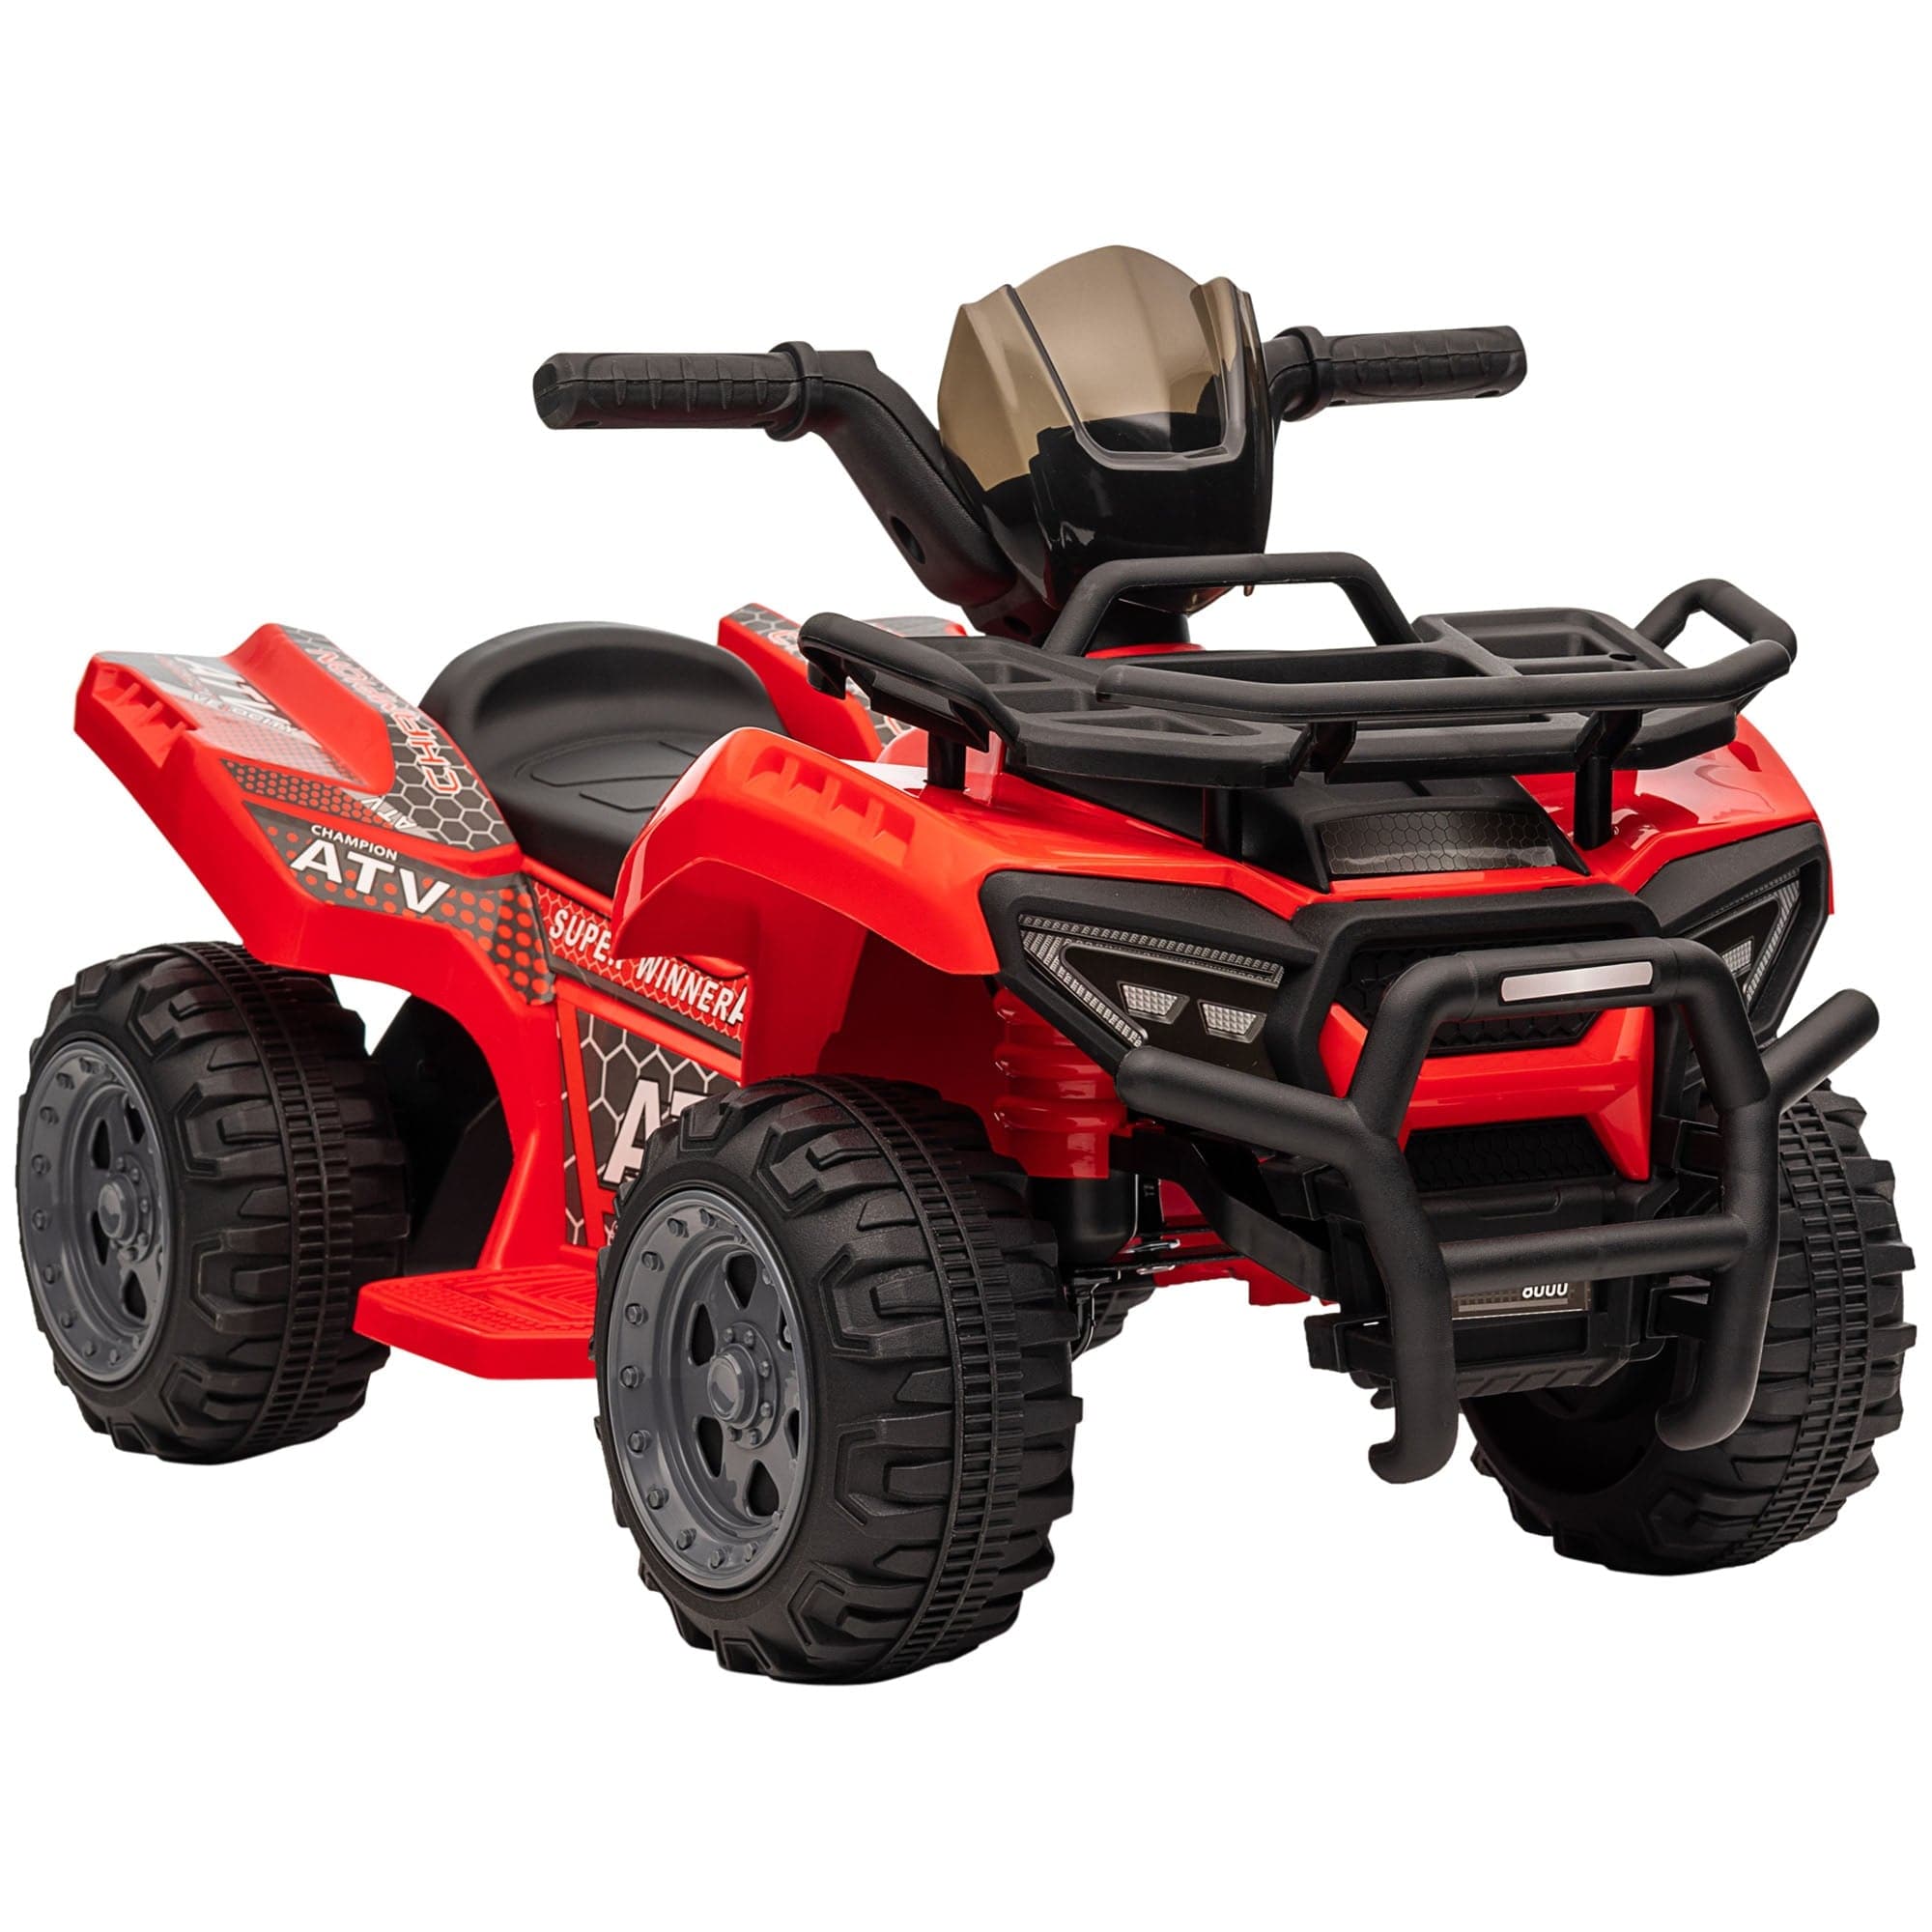 HOMCOM 6V Kids Electric Ride on Toy ATV Quad Bike with Music & Headlights for 18-36 Months (Red)